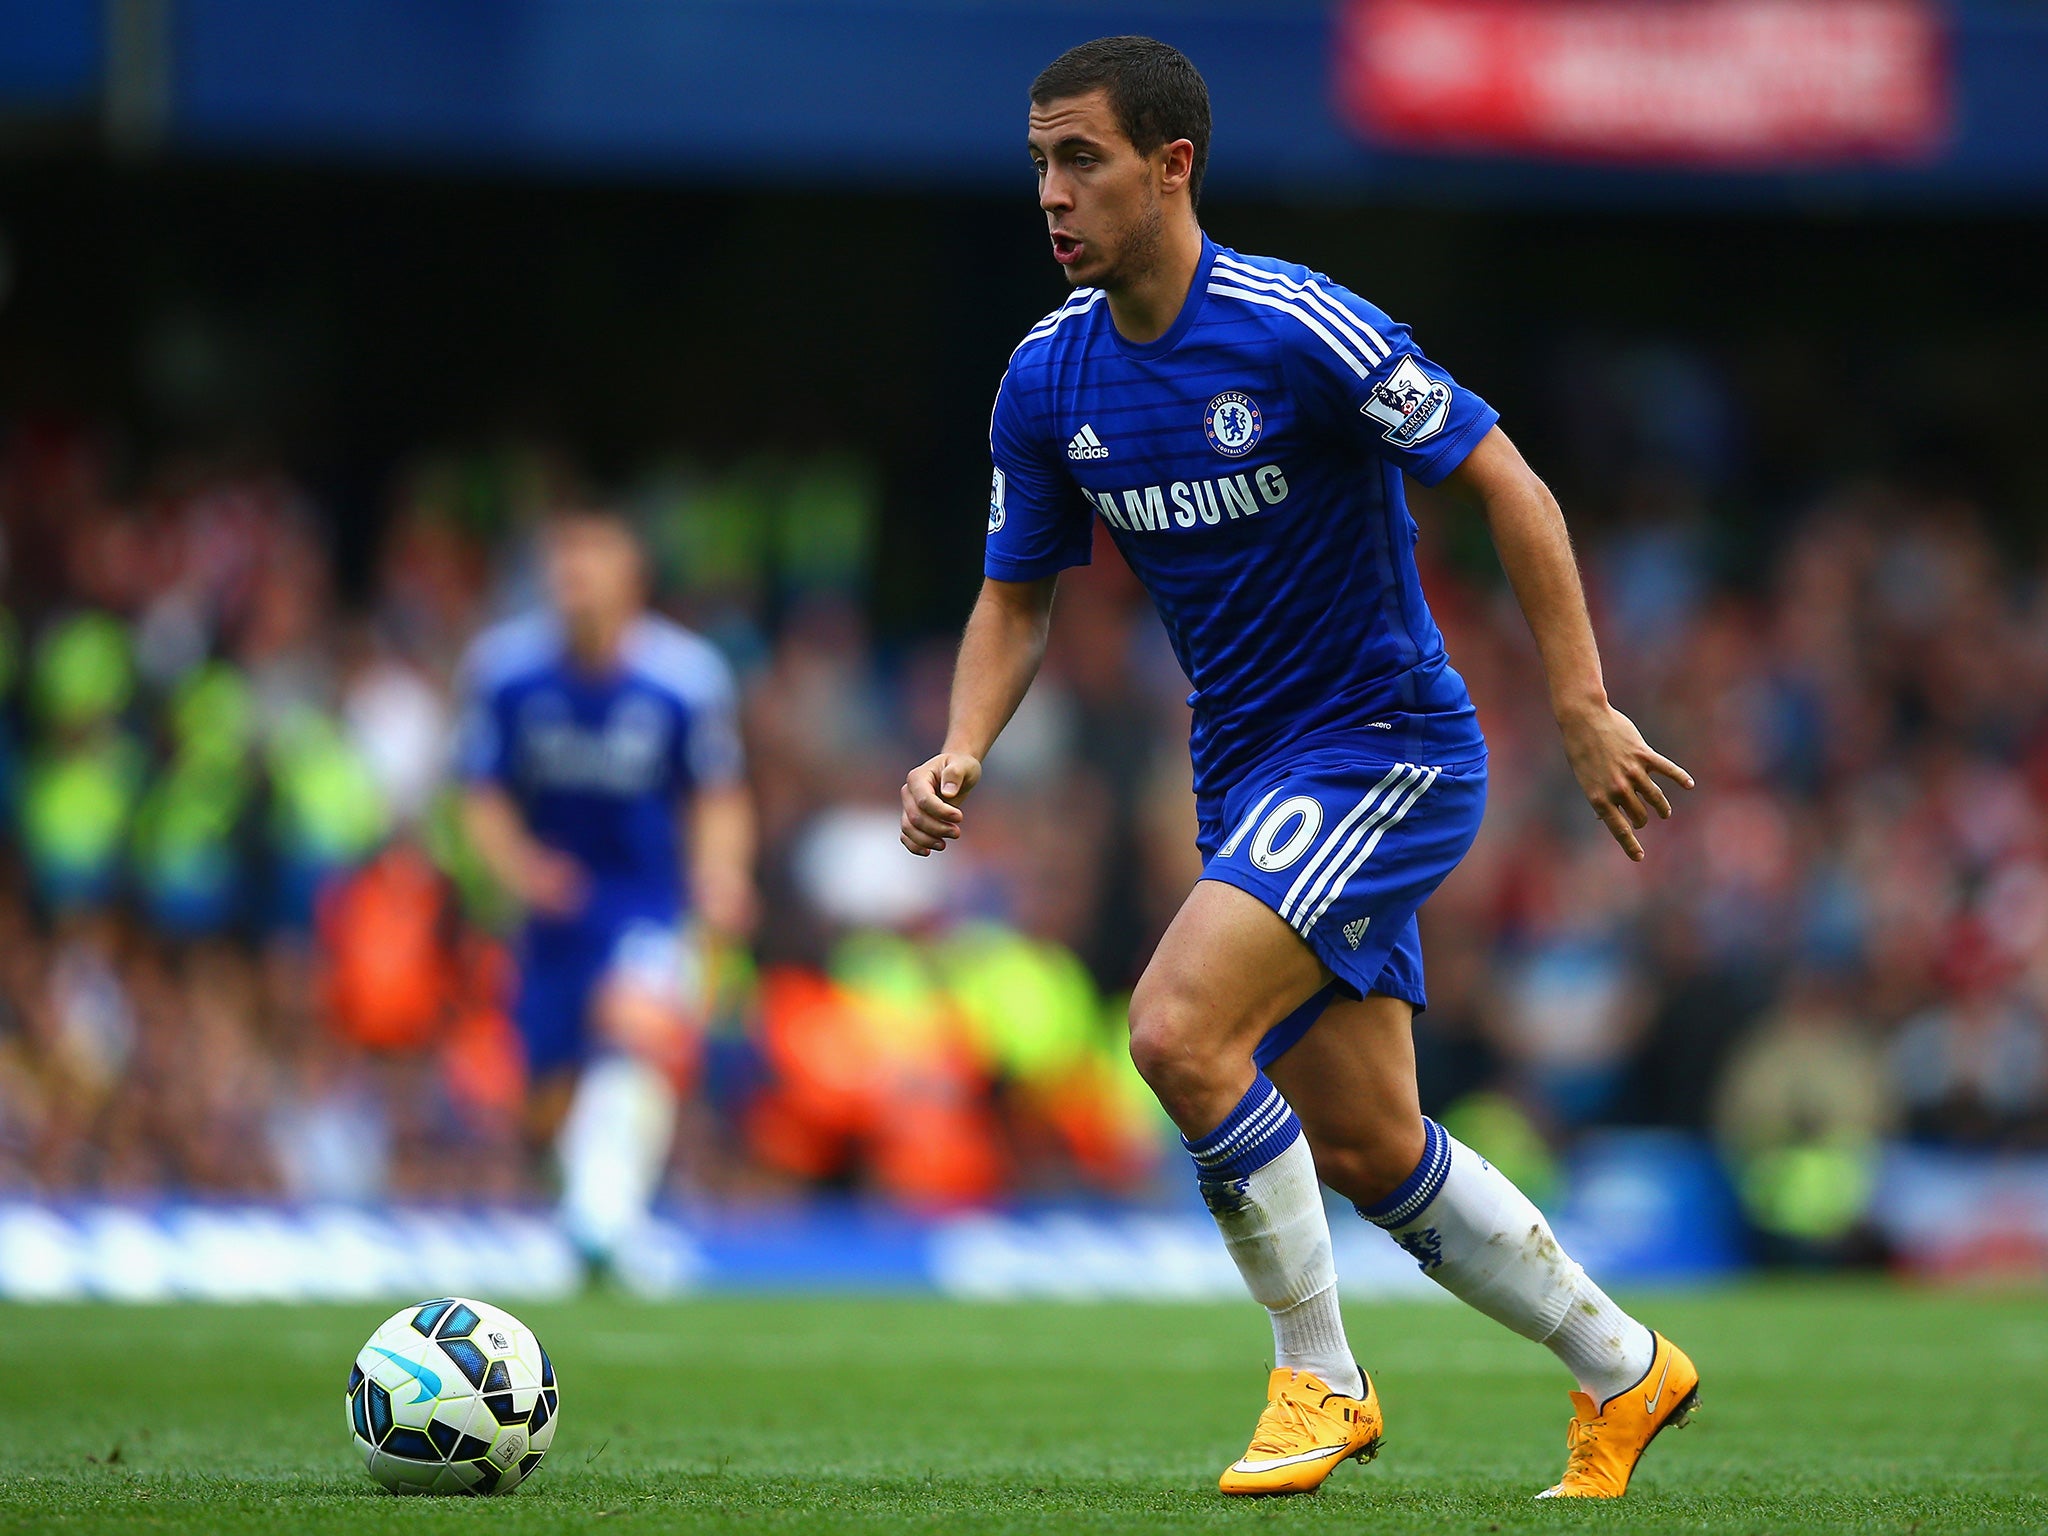 Hazard has missed just 42 minutes of Premier League action for Jose Mourinho's side in 2014/15